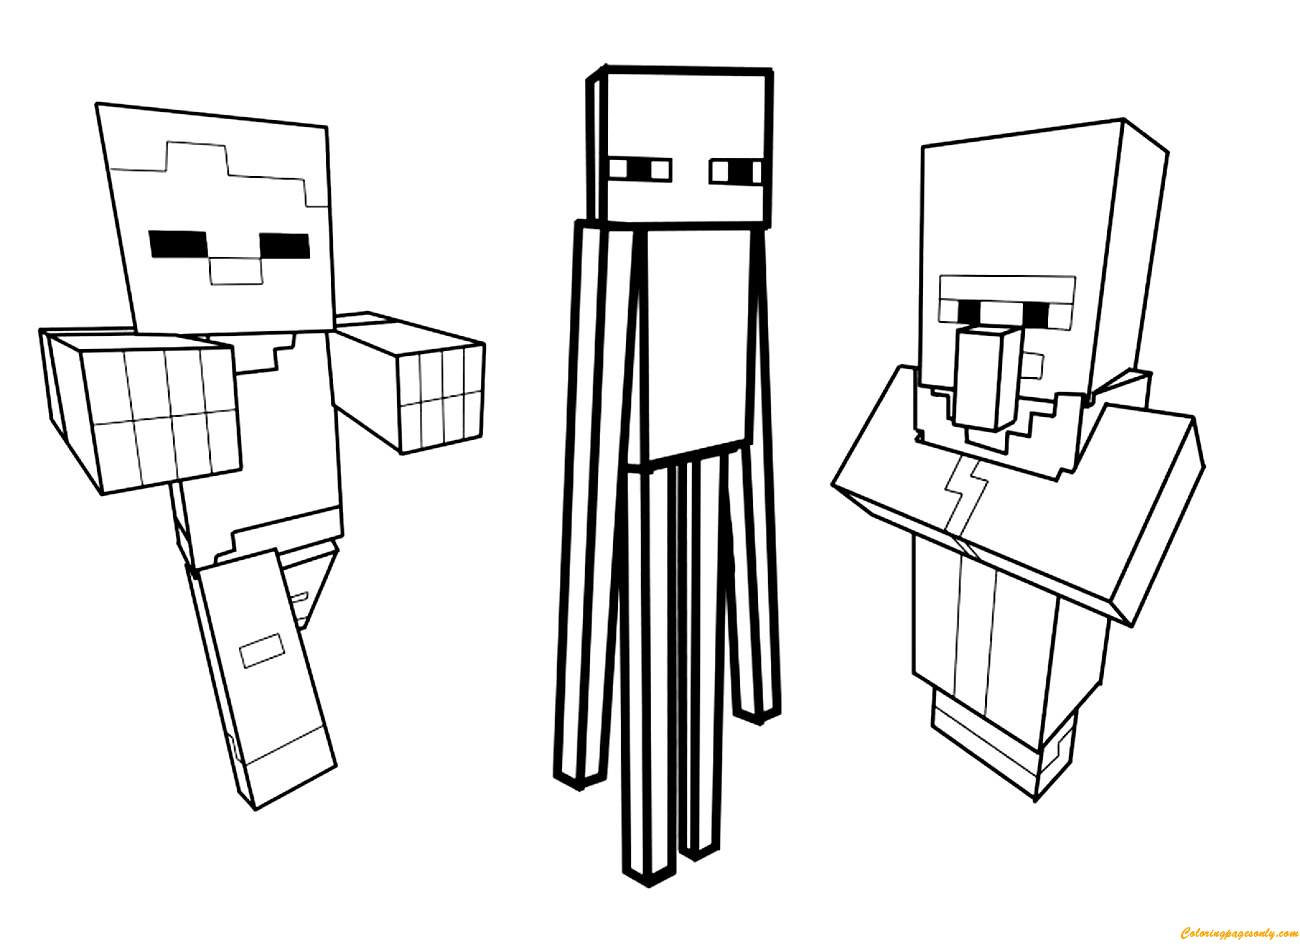 Steve Sitting With Minecraft Coloring Page - Free Coloring Pages Online